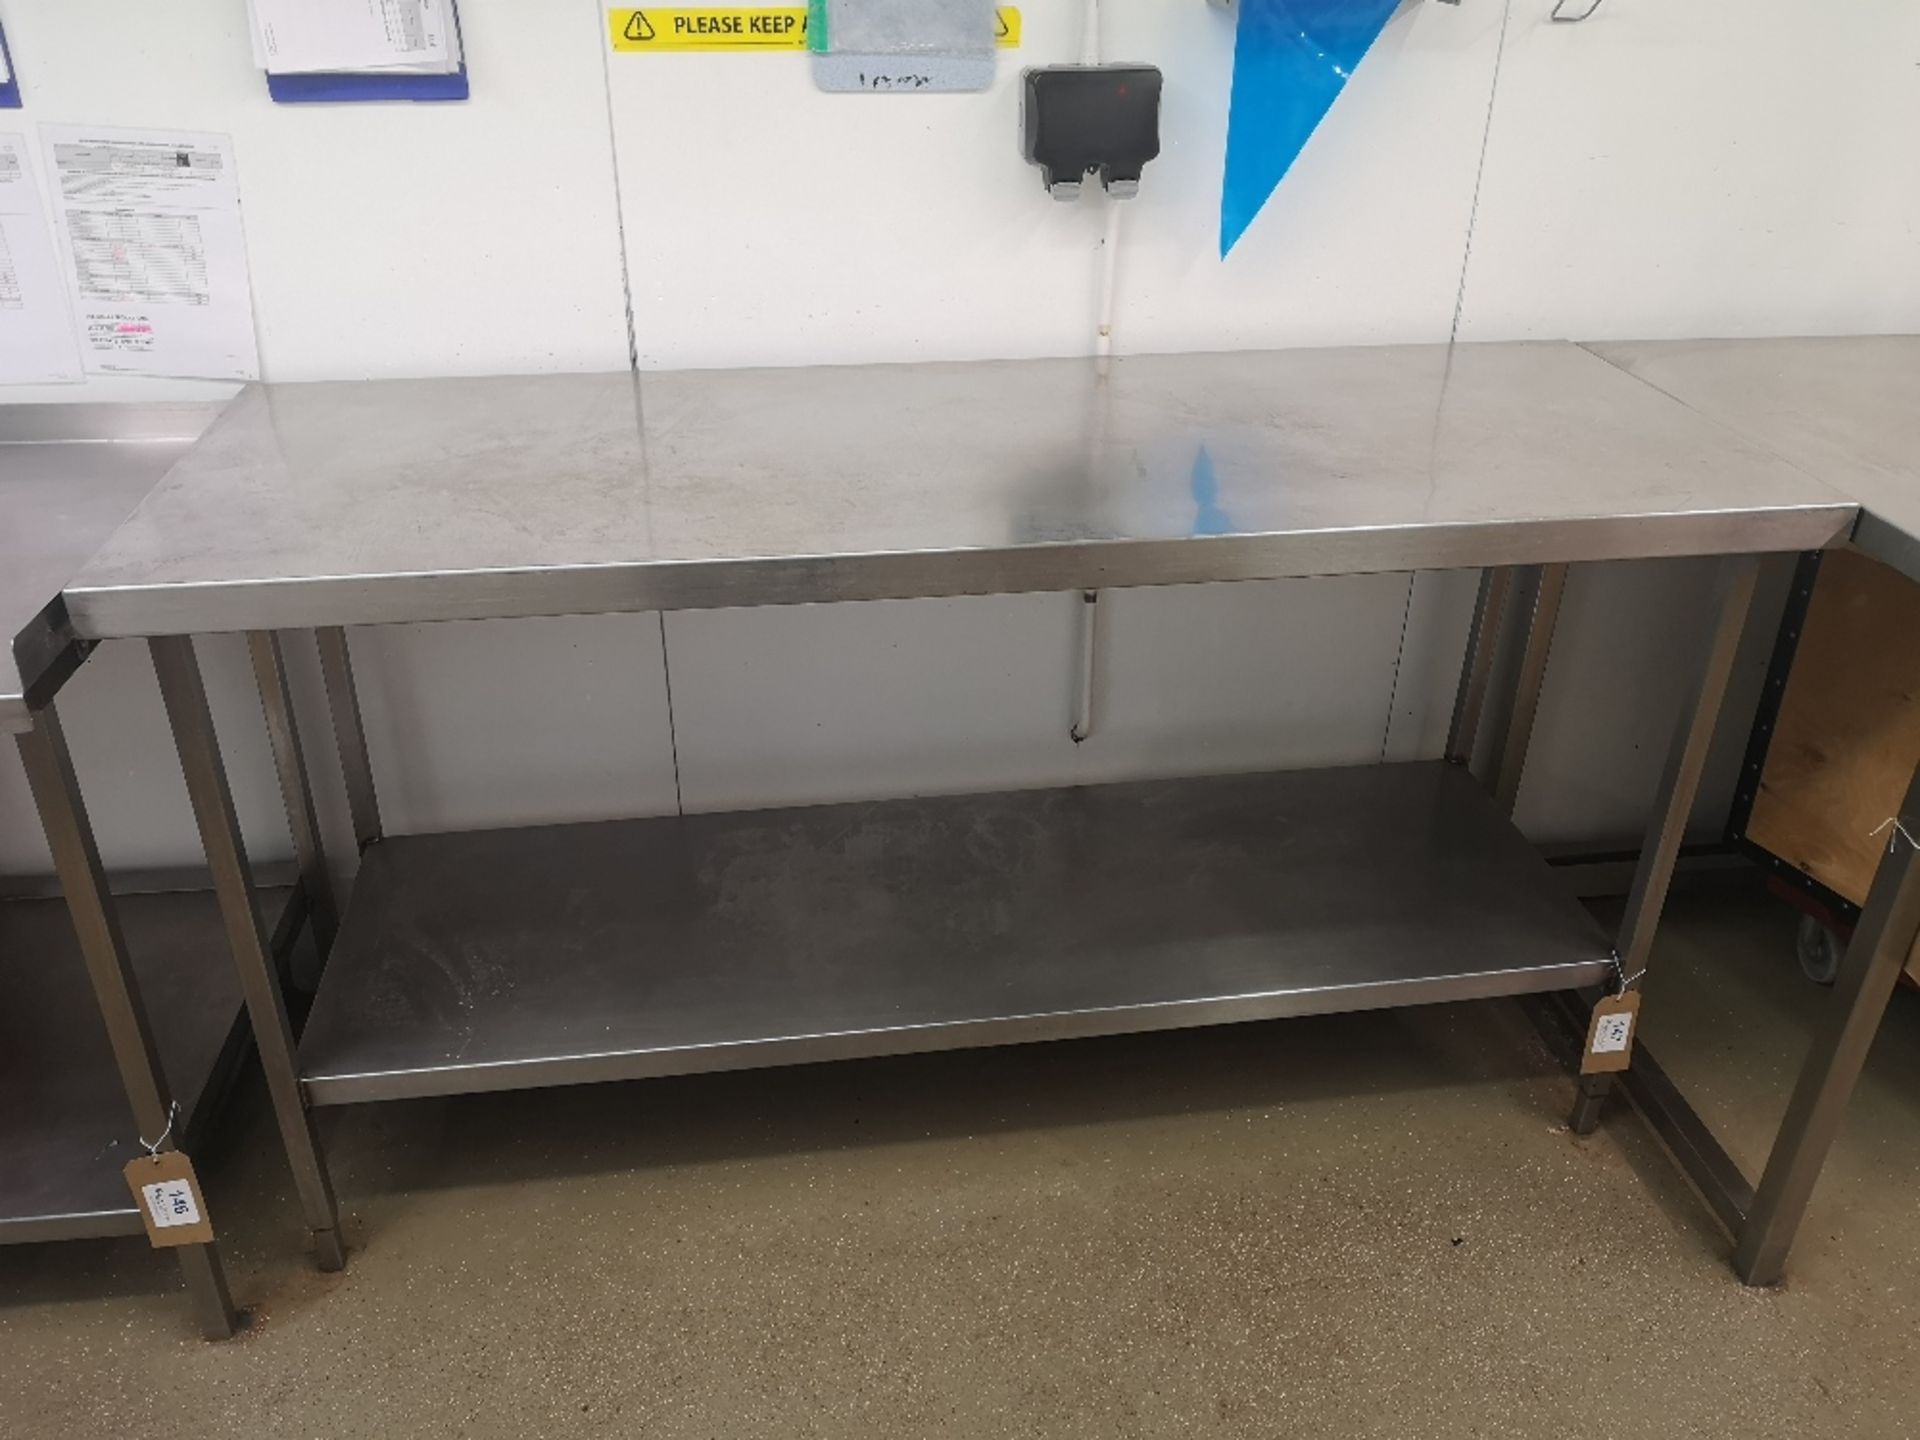 Two Tier Stainless Steel Preparation Table